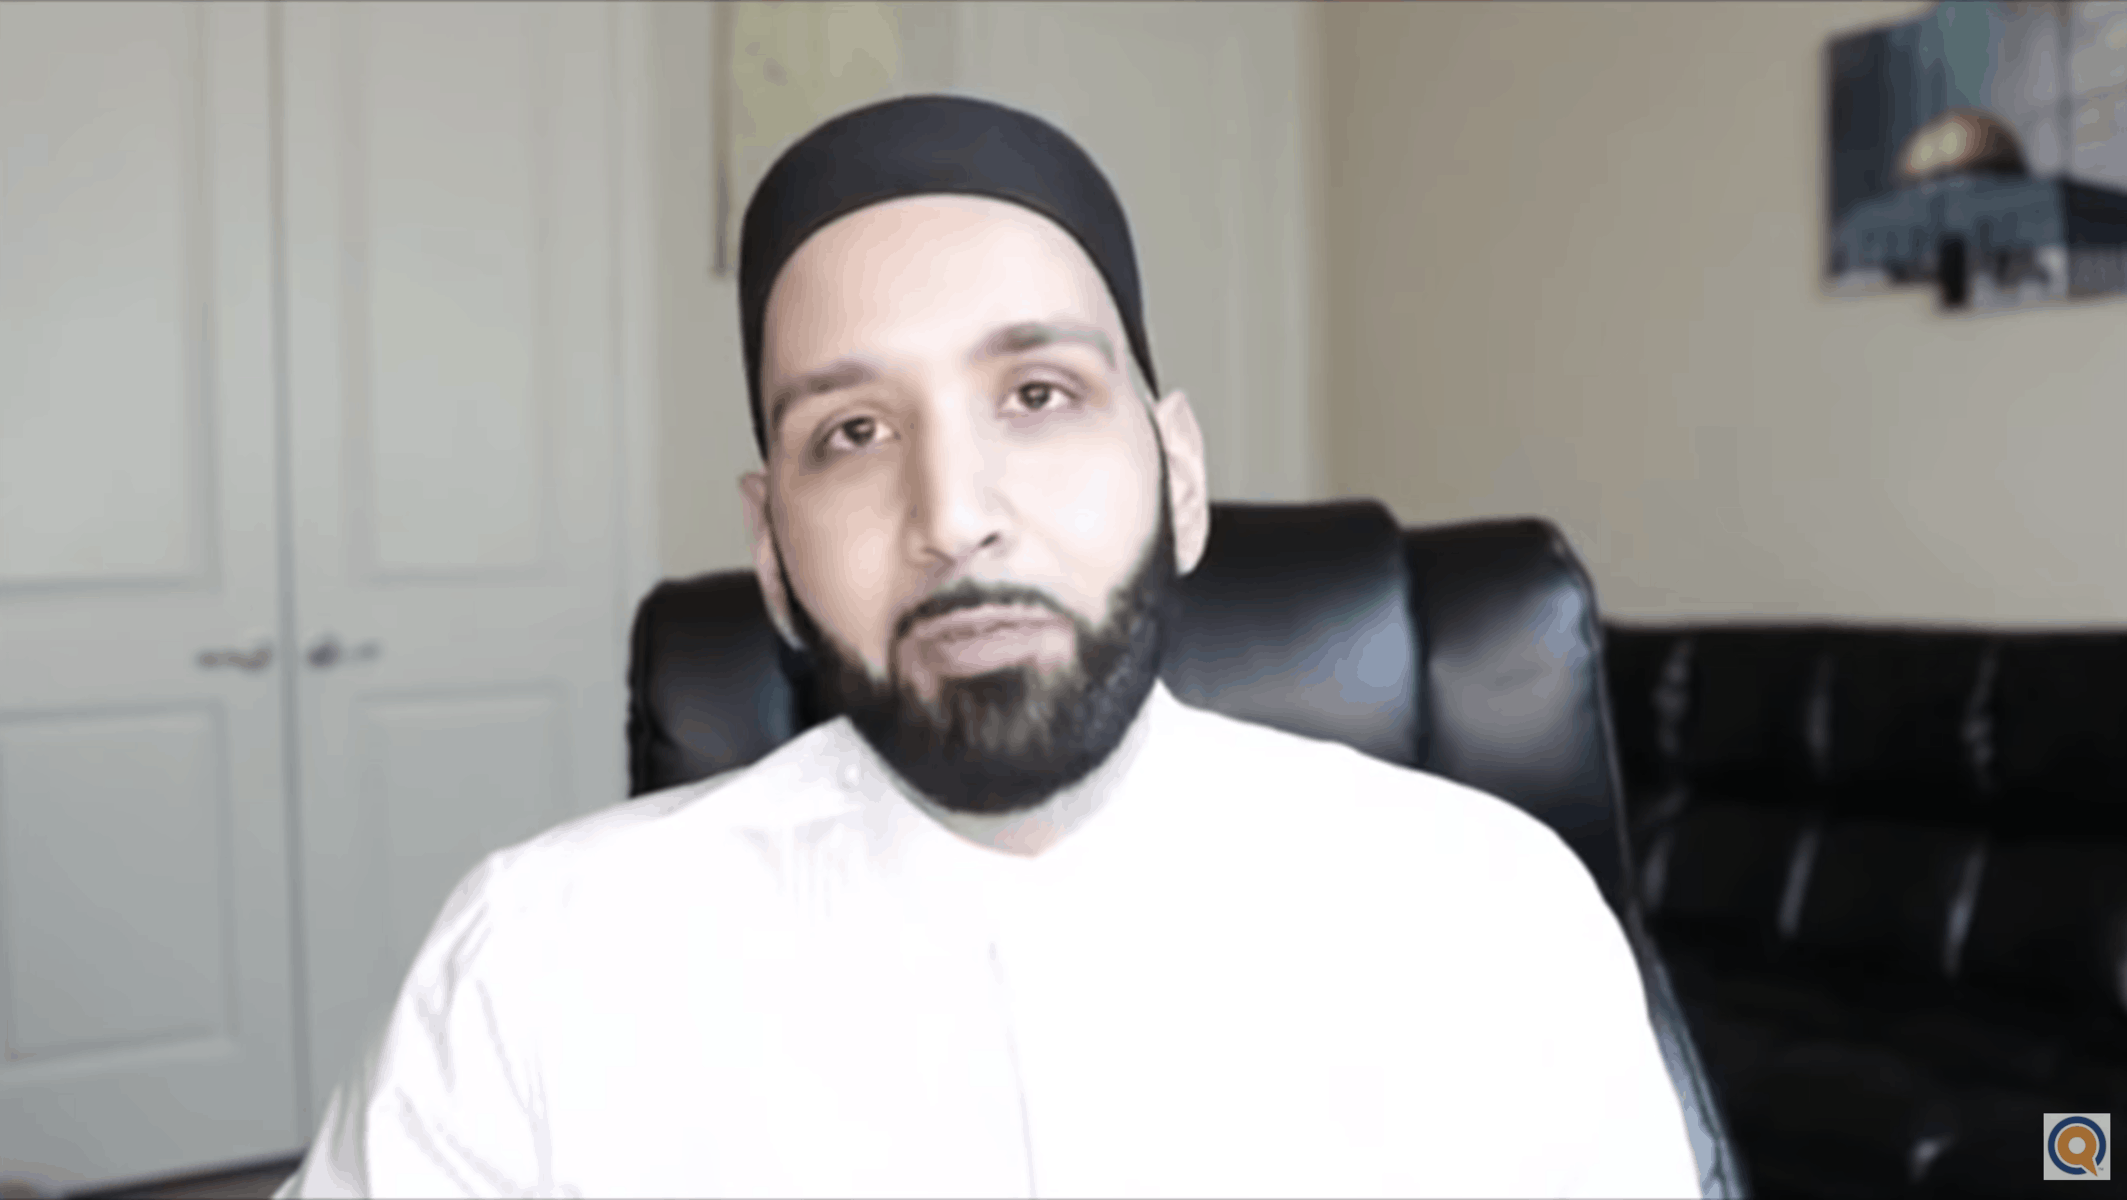 Omar Suleiman – The Gravity of One Murder, and the Death of Justice